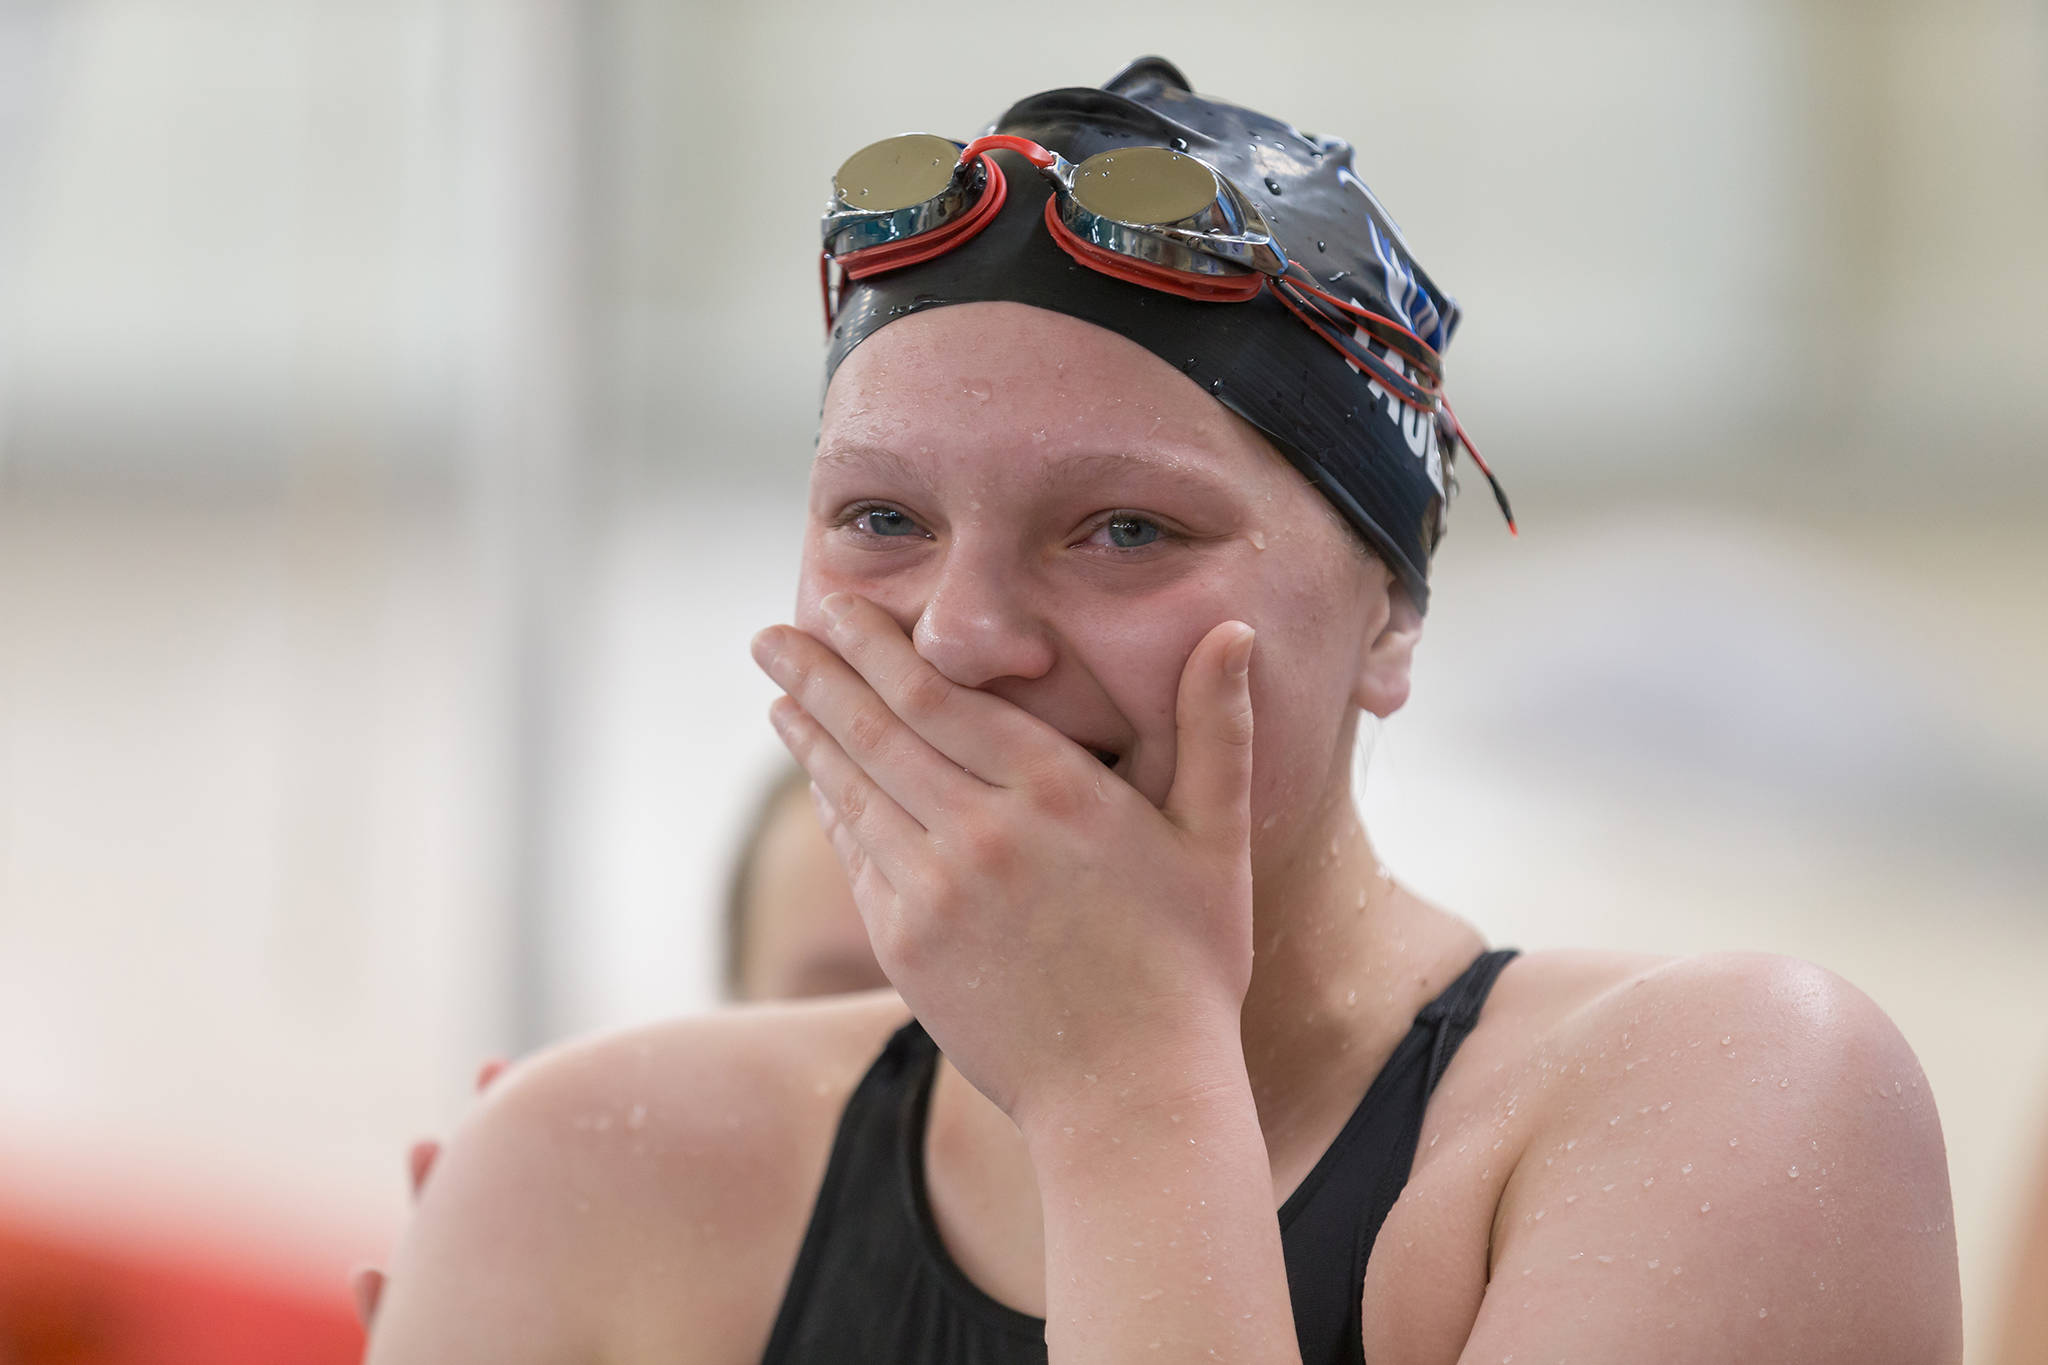 Thunder Mountain’s Hannah Taube reacts after setting a new lifetime best time in the 500-yard freestyle event. (Courtesy Photo | Phil Loseby)